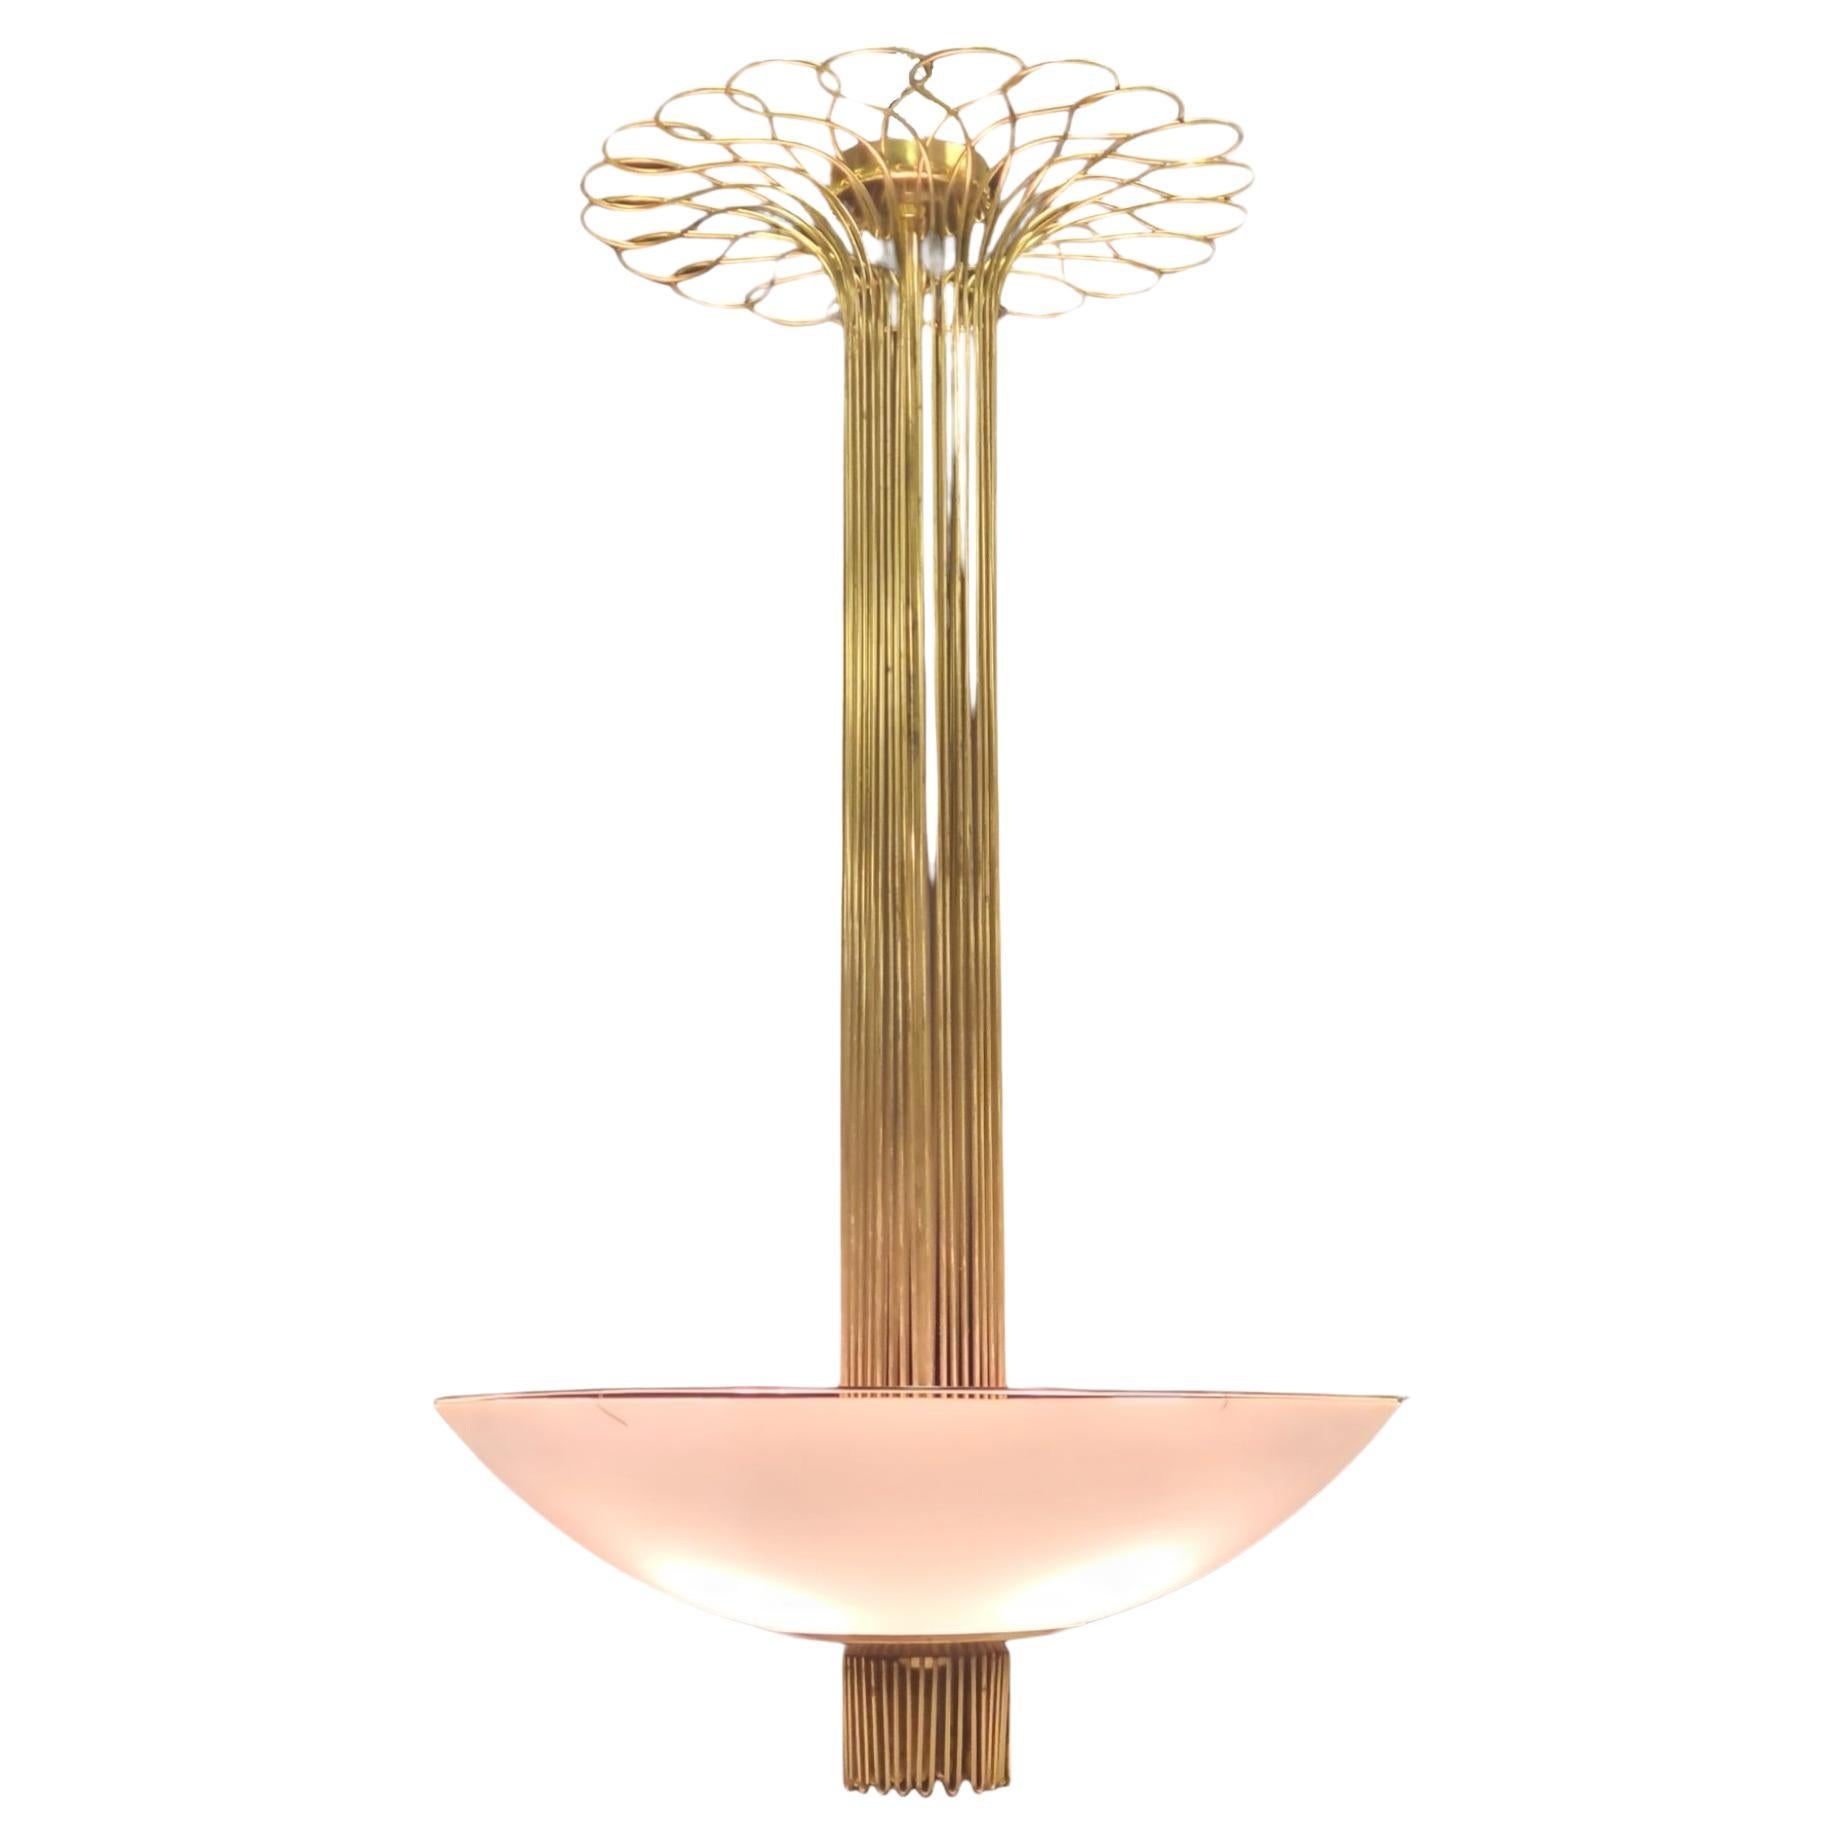 Scandinavian Modern Paavo Tynell Ceiling Lamp In Brass And Glass For Sale